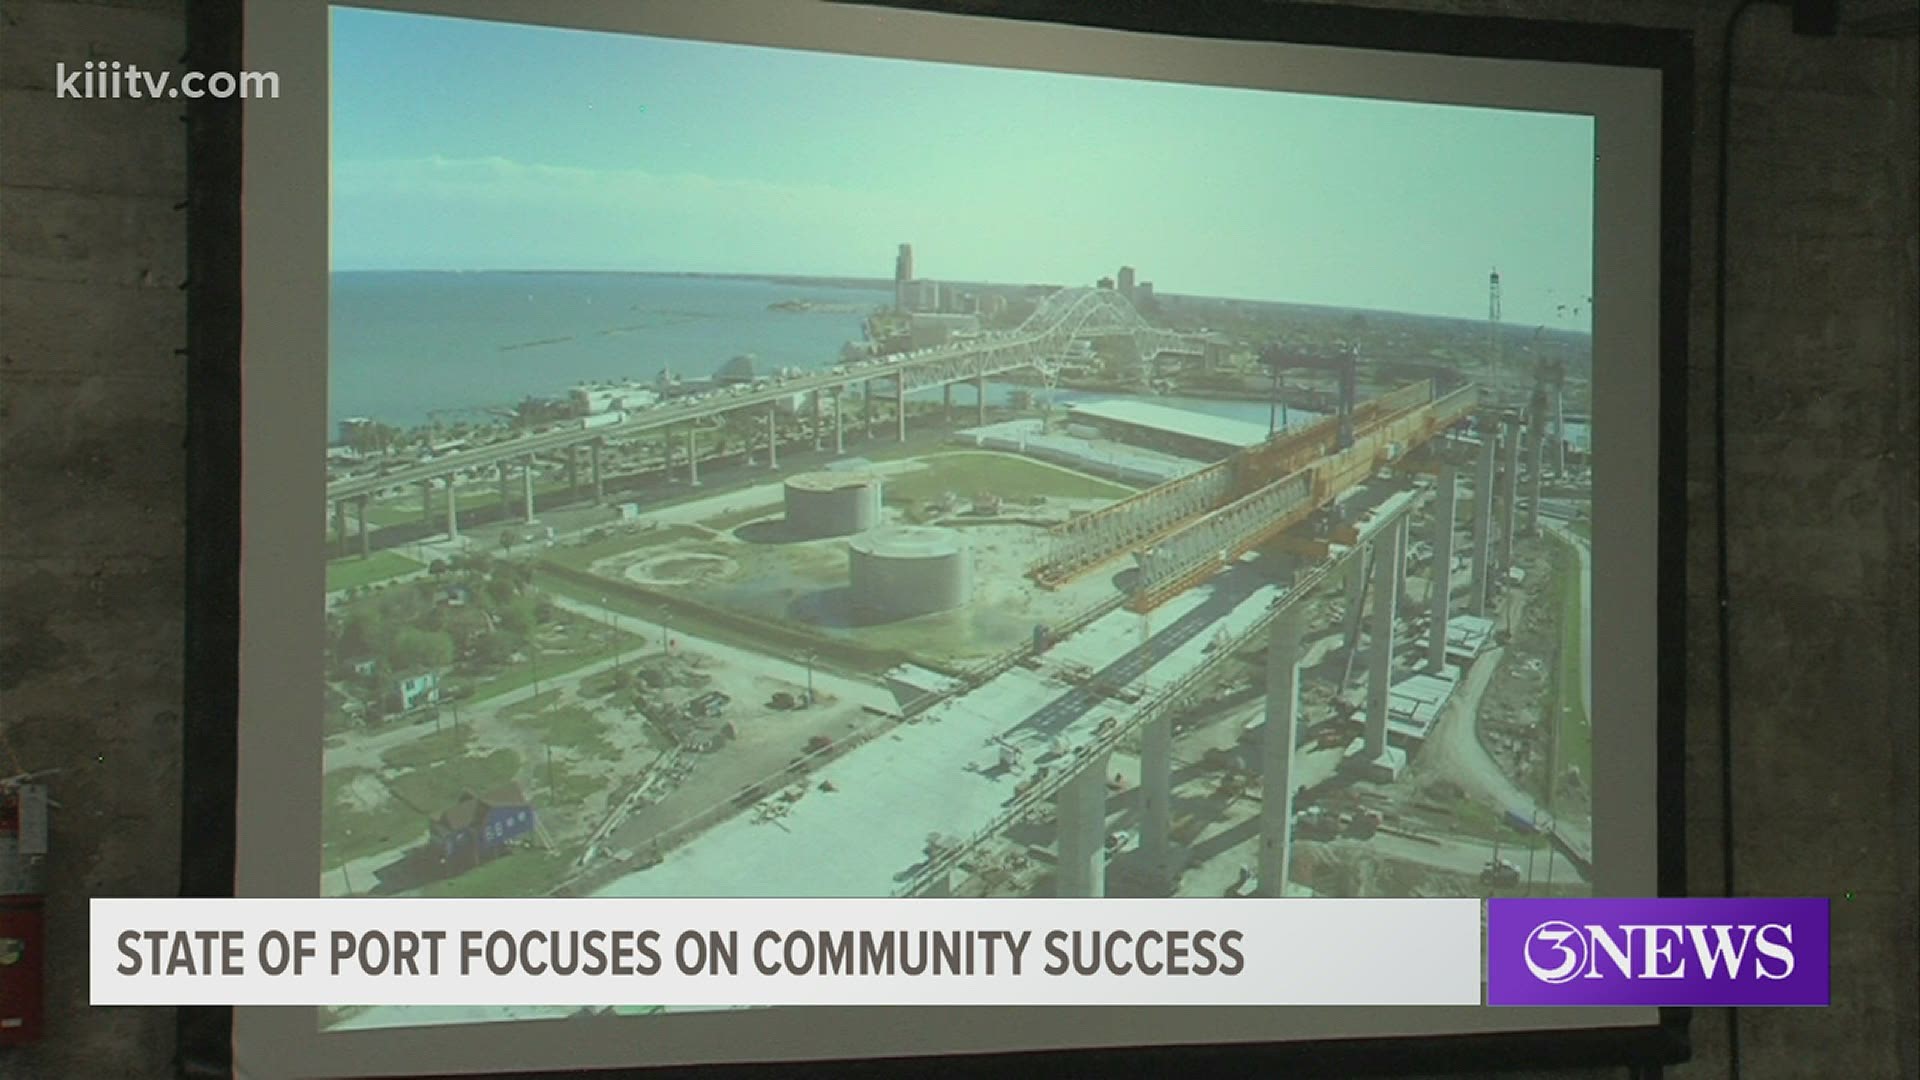 “This event showcases not only the tribulations that we've dealt with but also the successes that we've had,” CEO of the Port, Sean Strawbridge.